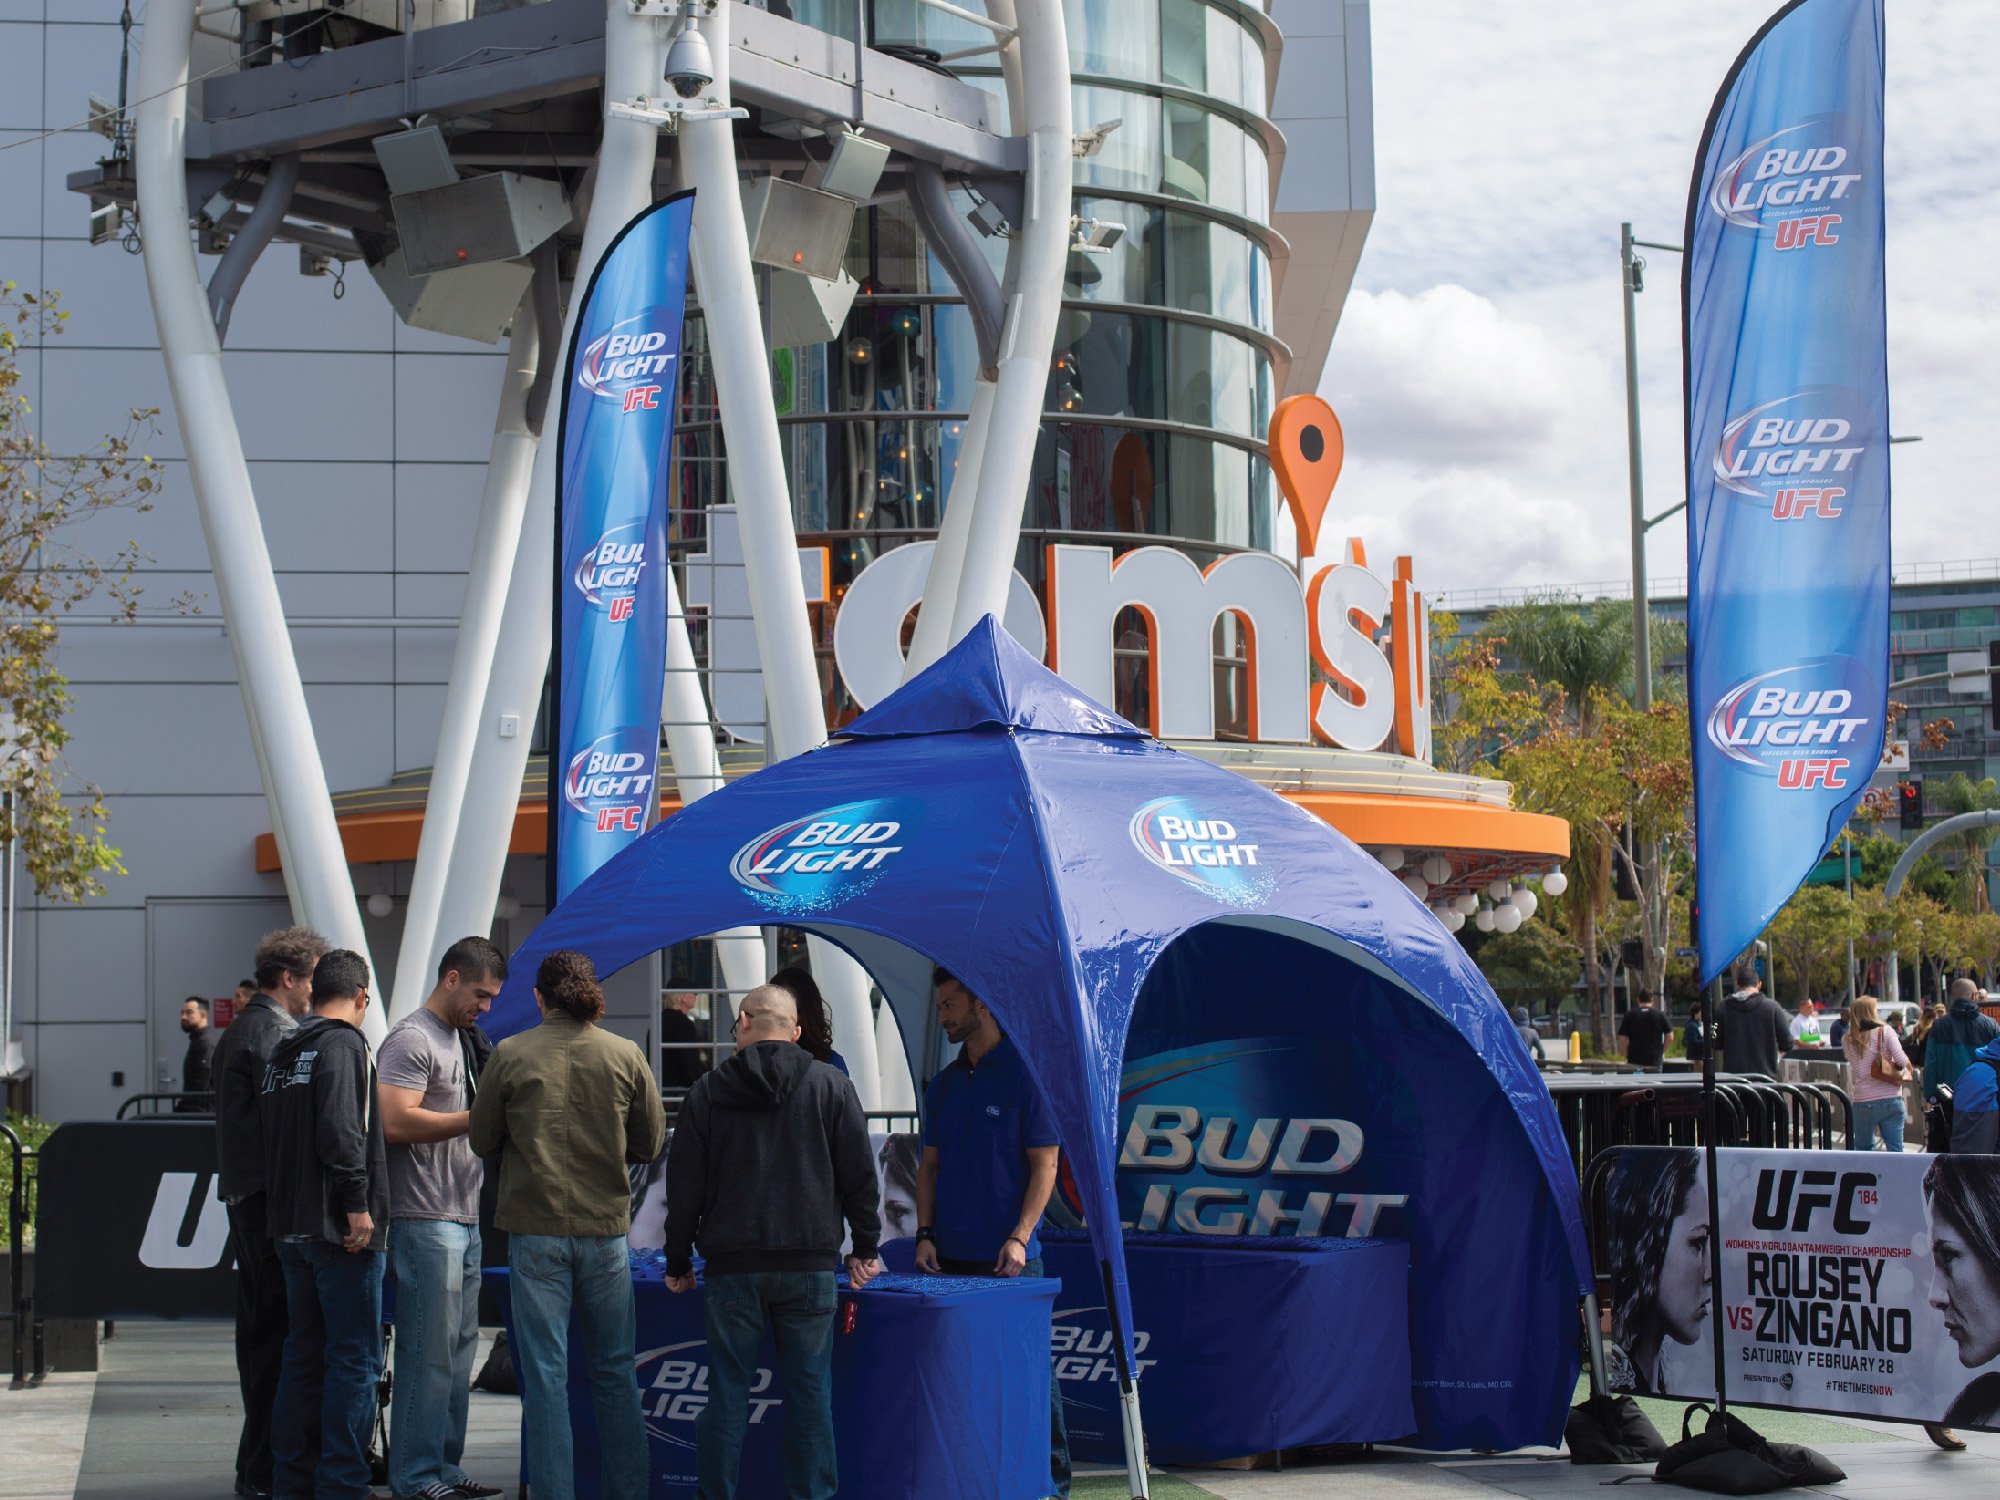 Bud Light custom printed advertising flags and dome tent at the Staples Center for a UFC event